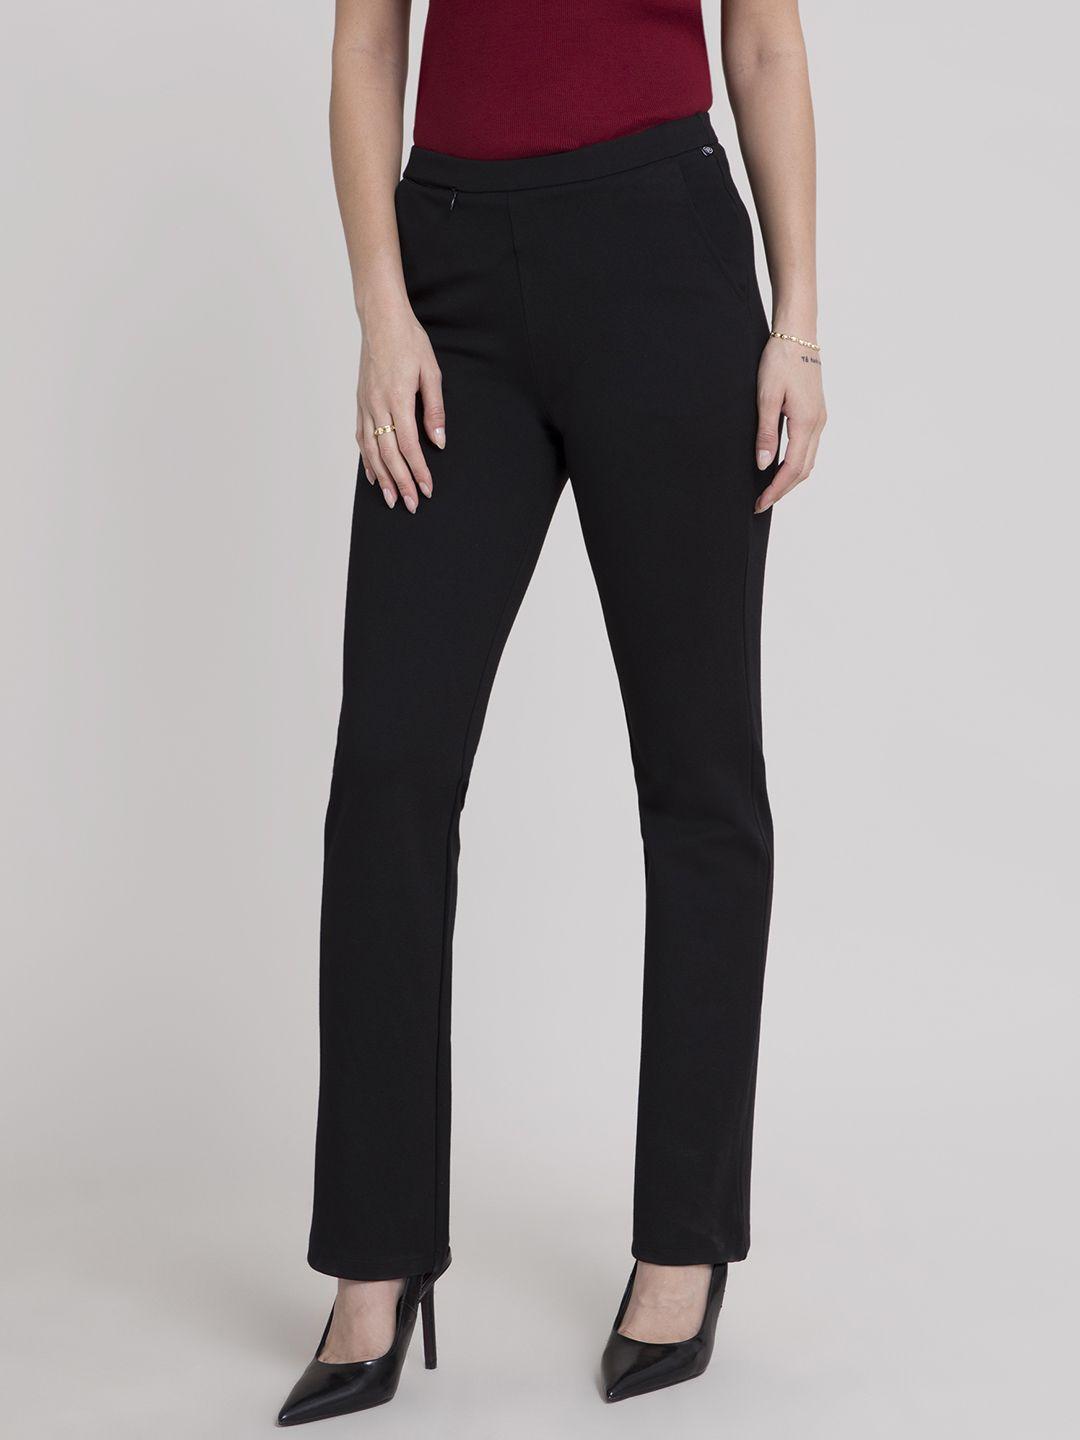 fablestreet-livin-bootcut-formal-trousers